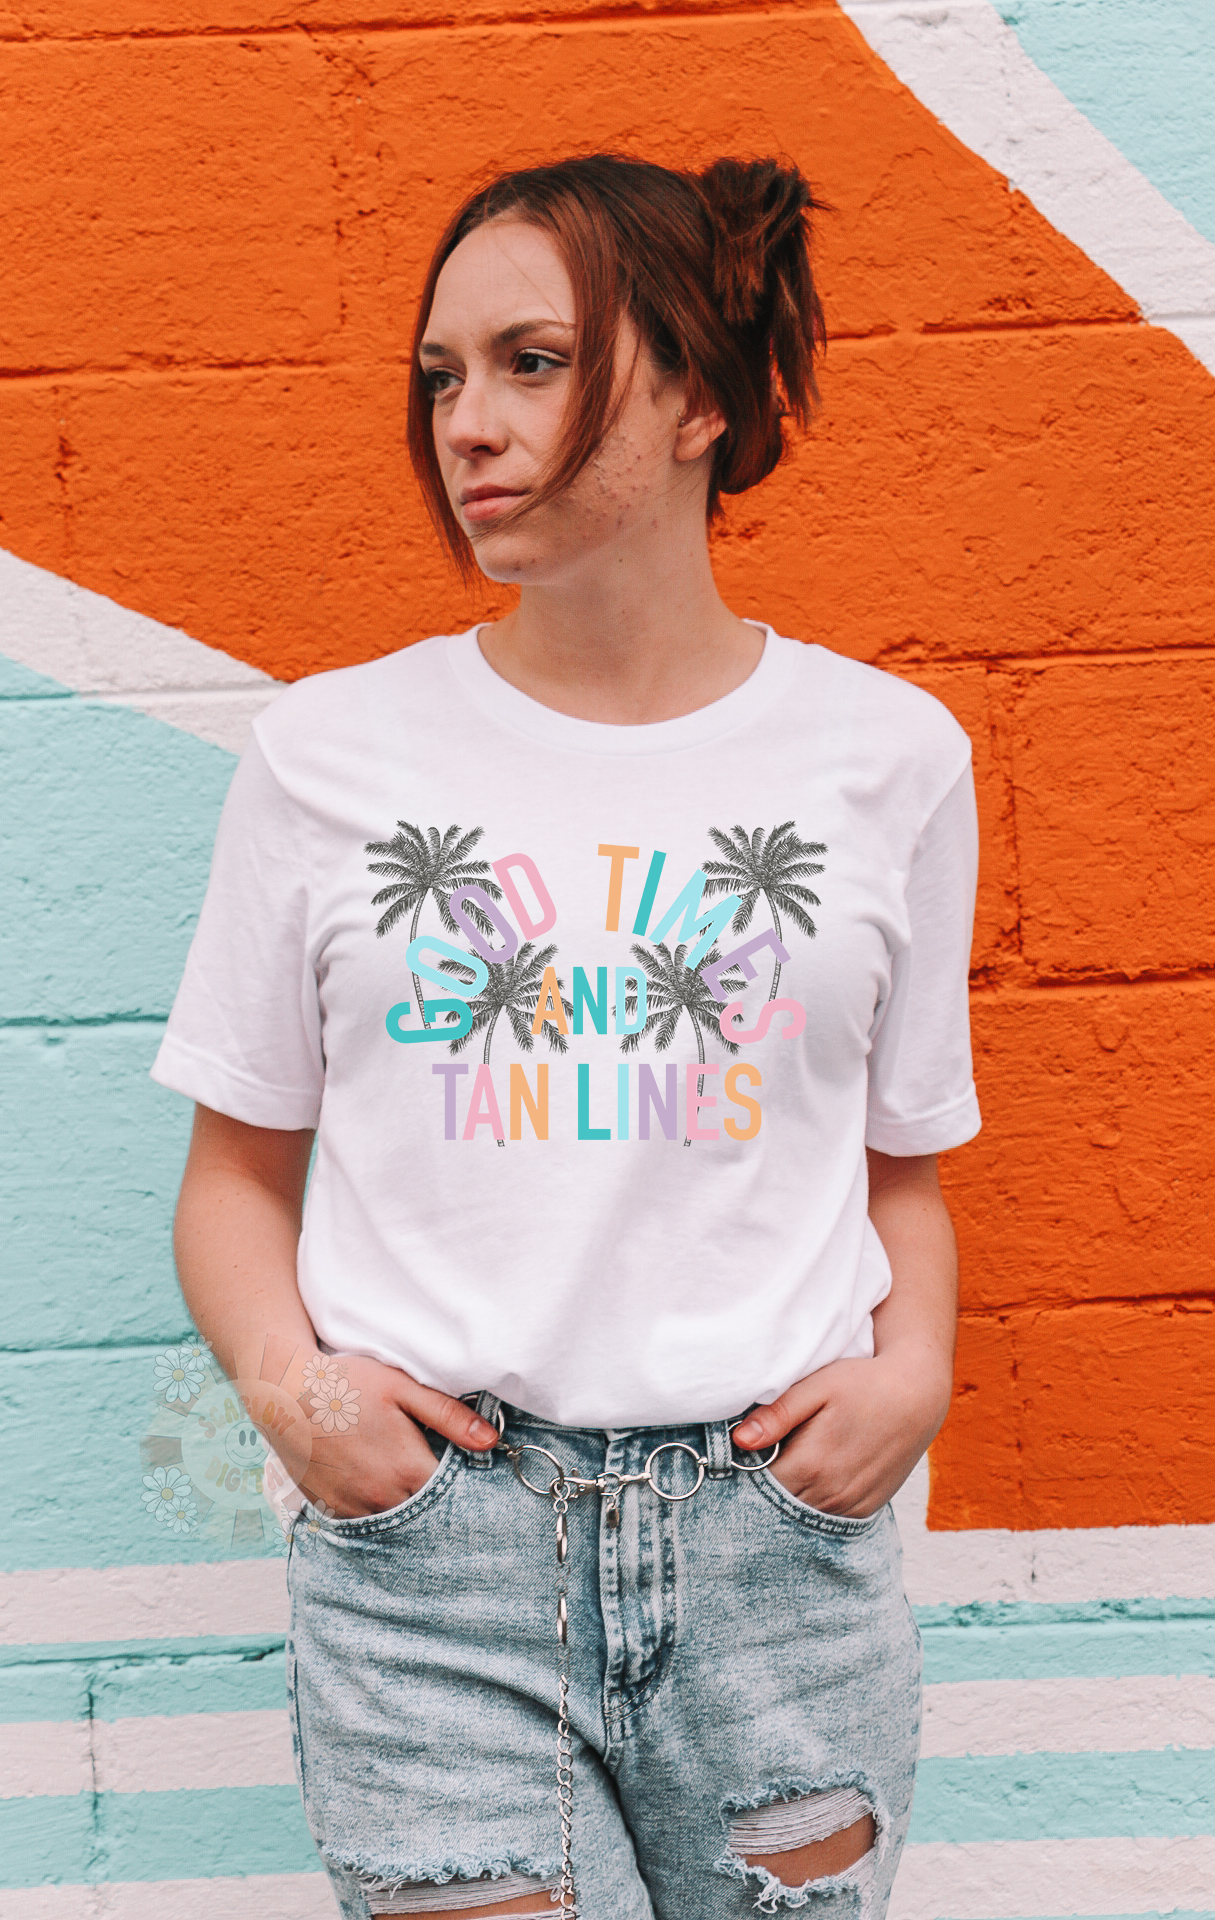 Good Times and Tan Lines PNG-Summer Sublimation Digital Design Download-summer vibes png, palm trees png, beachy png, ocean png, vacay png